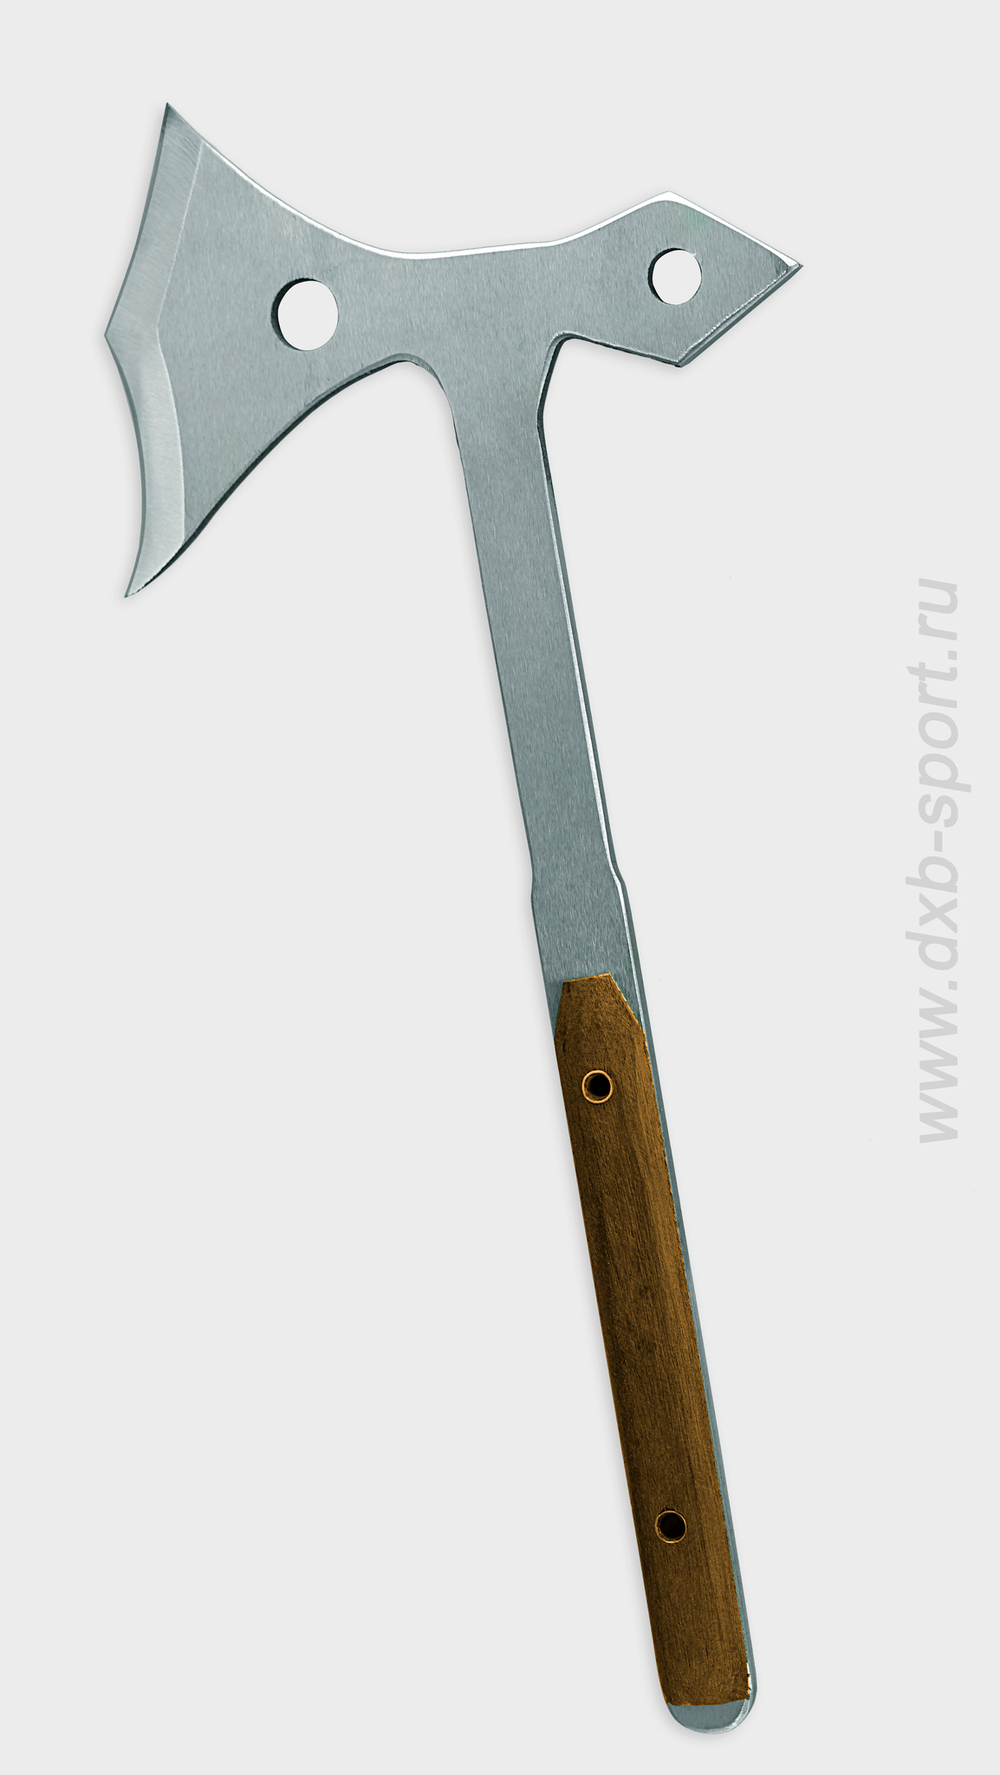 Throwing axe "Architricline"